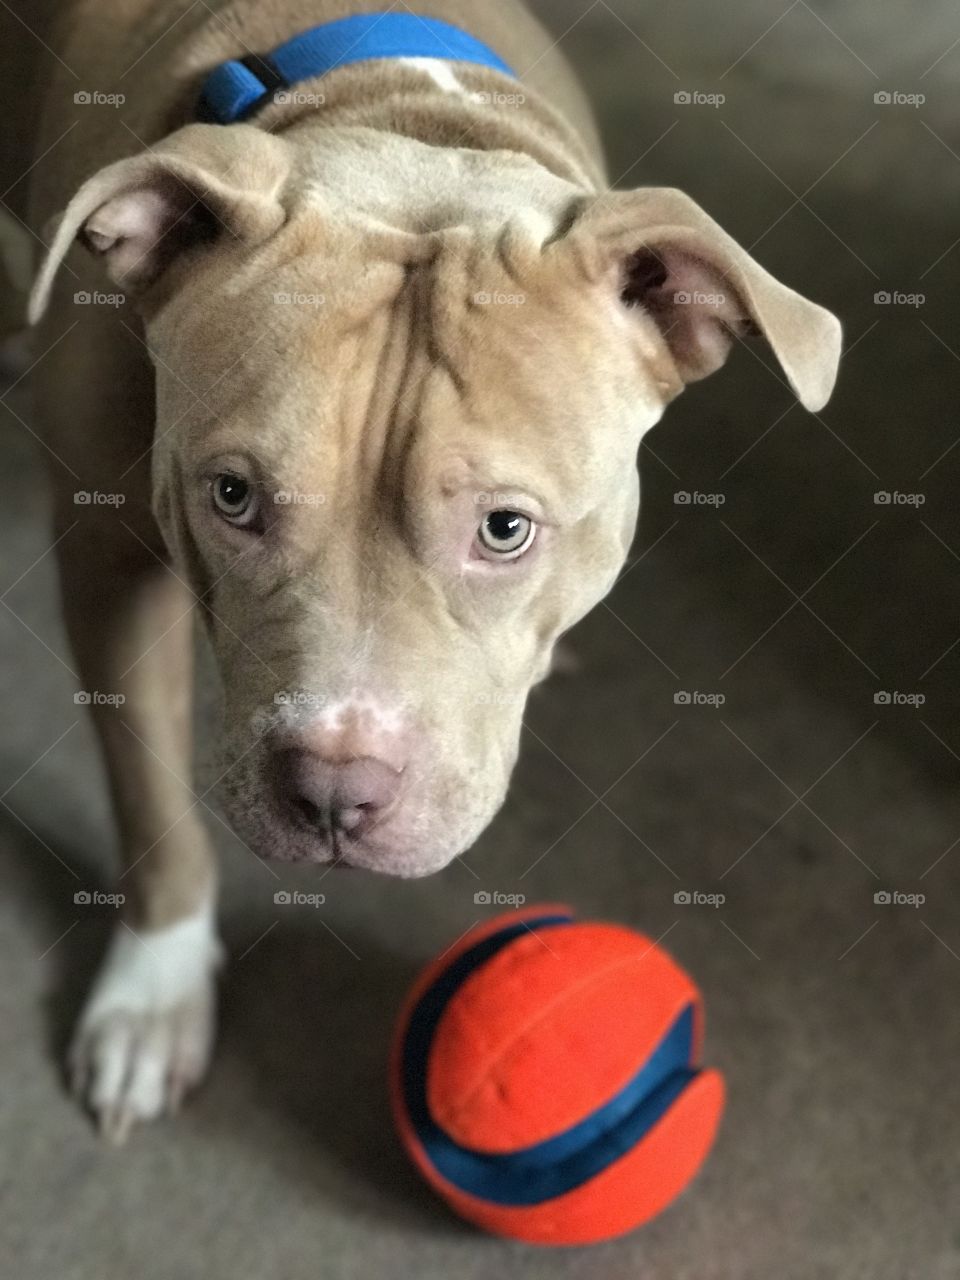 Pitbull playing with his chuck-it ball toy and the human taking his picture. 